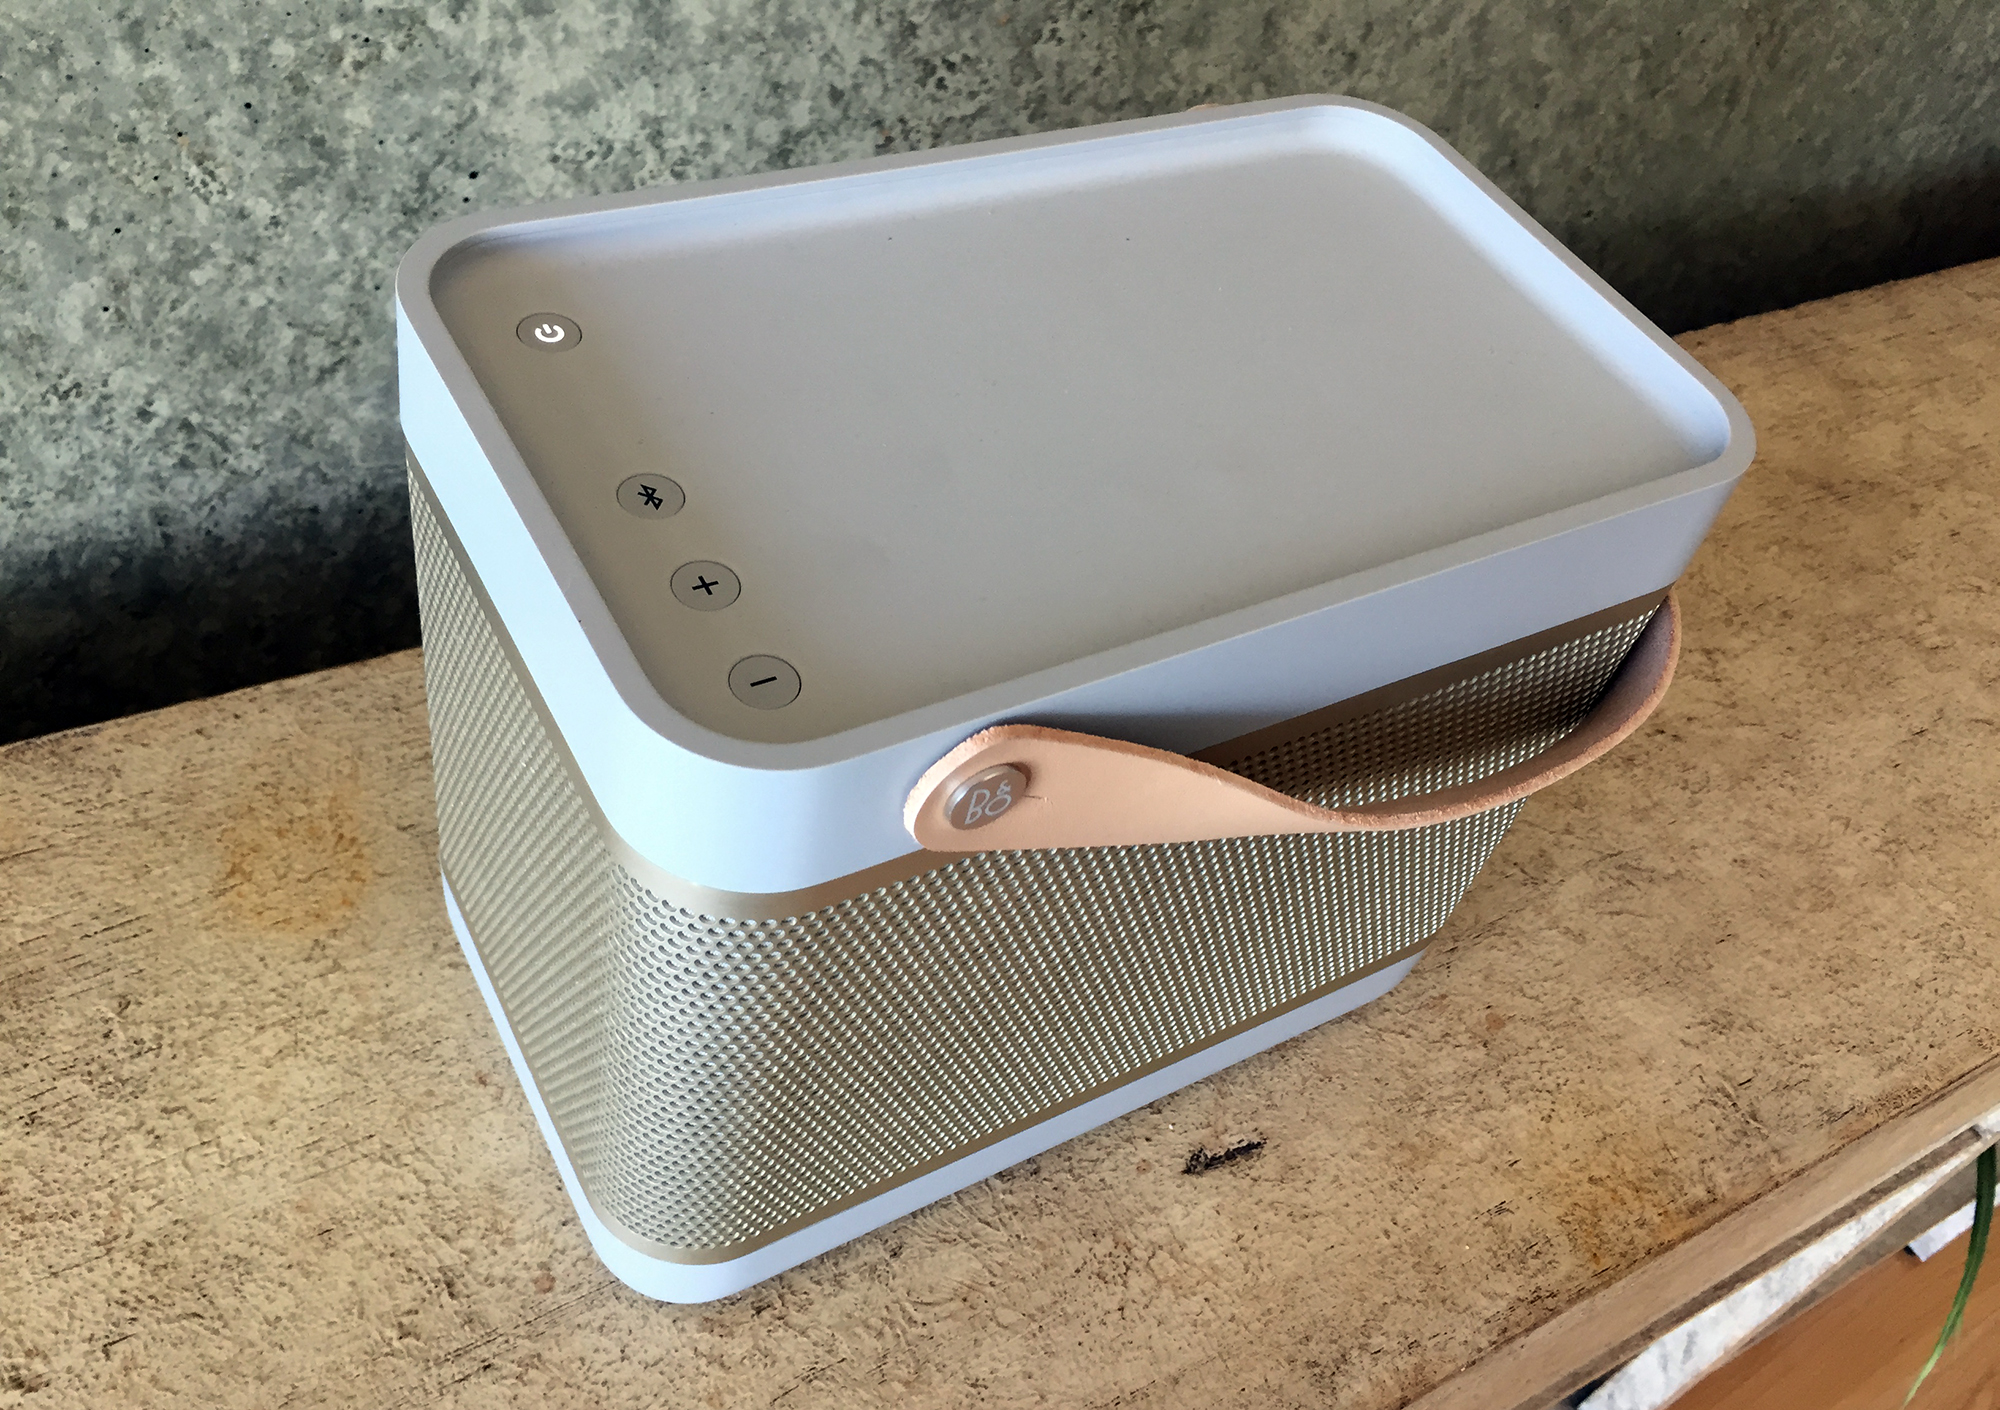 gouden snijder Missie Review: The Bang & Olufsen Beolit 15 is a big-ticket Bluetooth speaker with  a lavish design